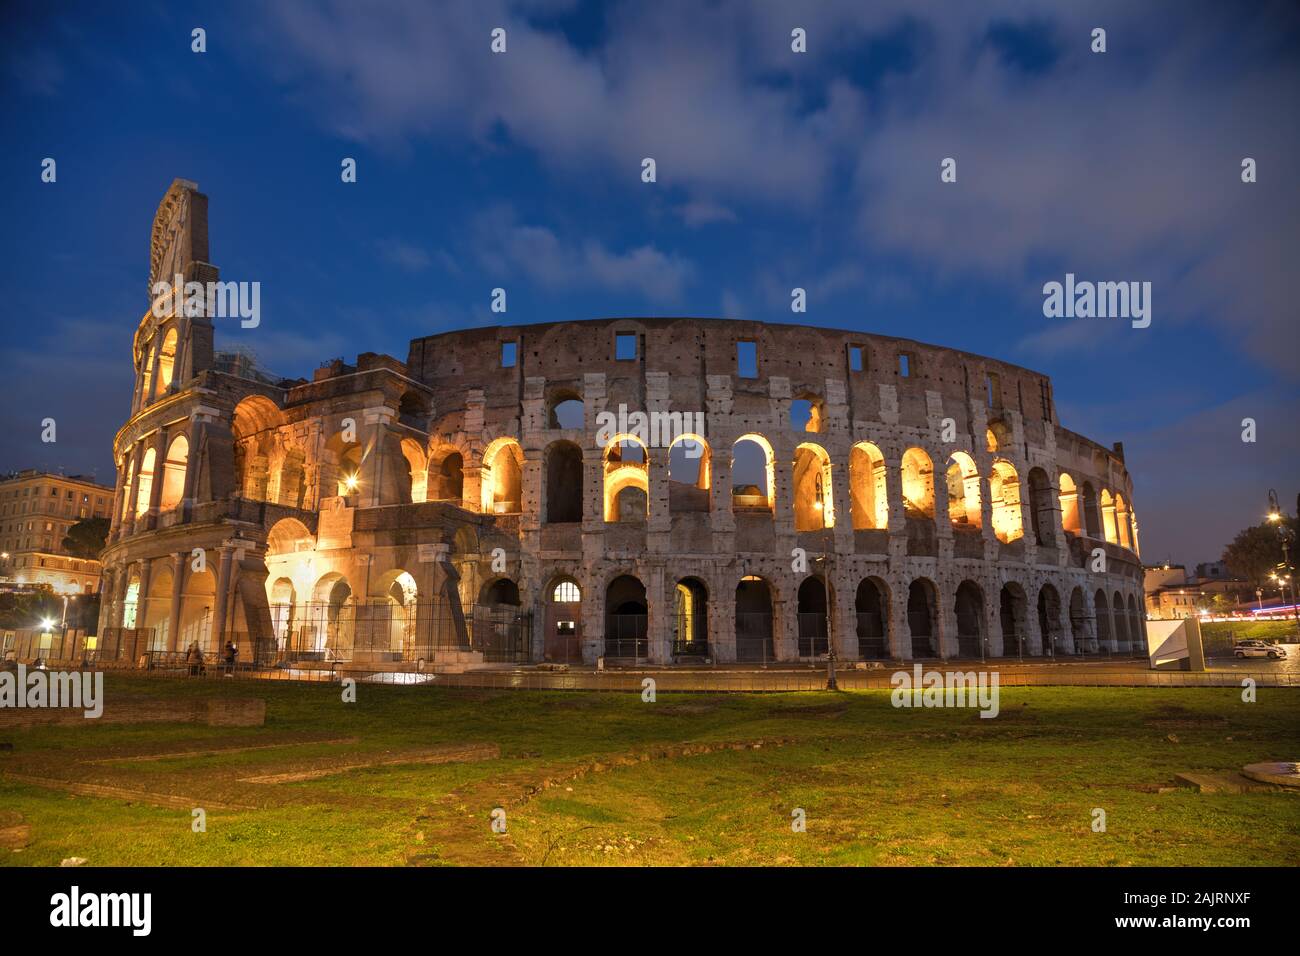 The Colosseum or Flavian Amphitheatre in Rome, Italy at night Stock Photo